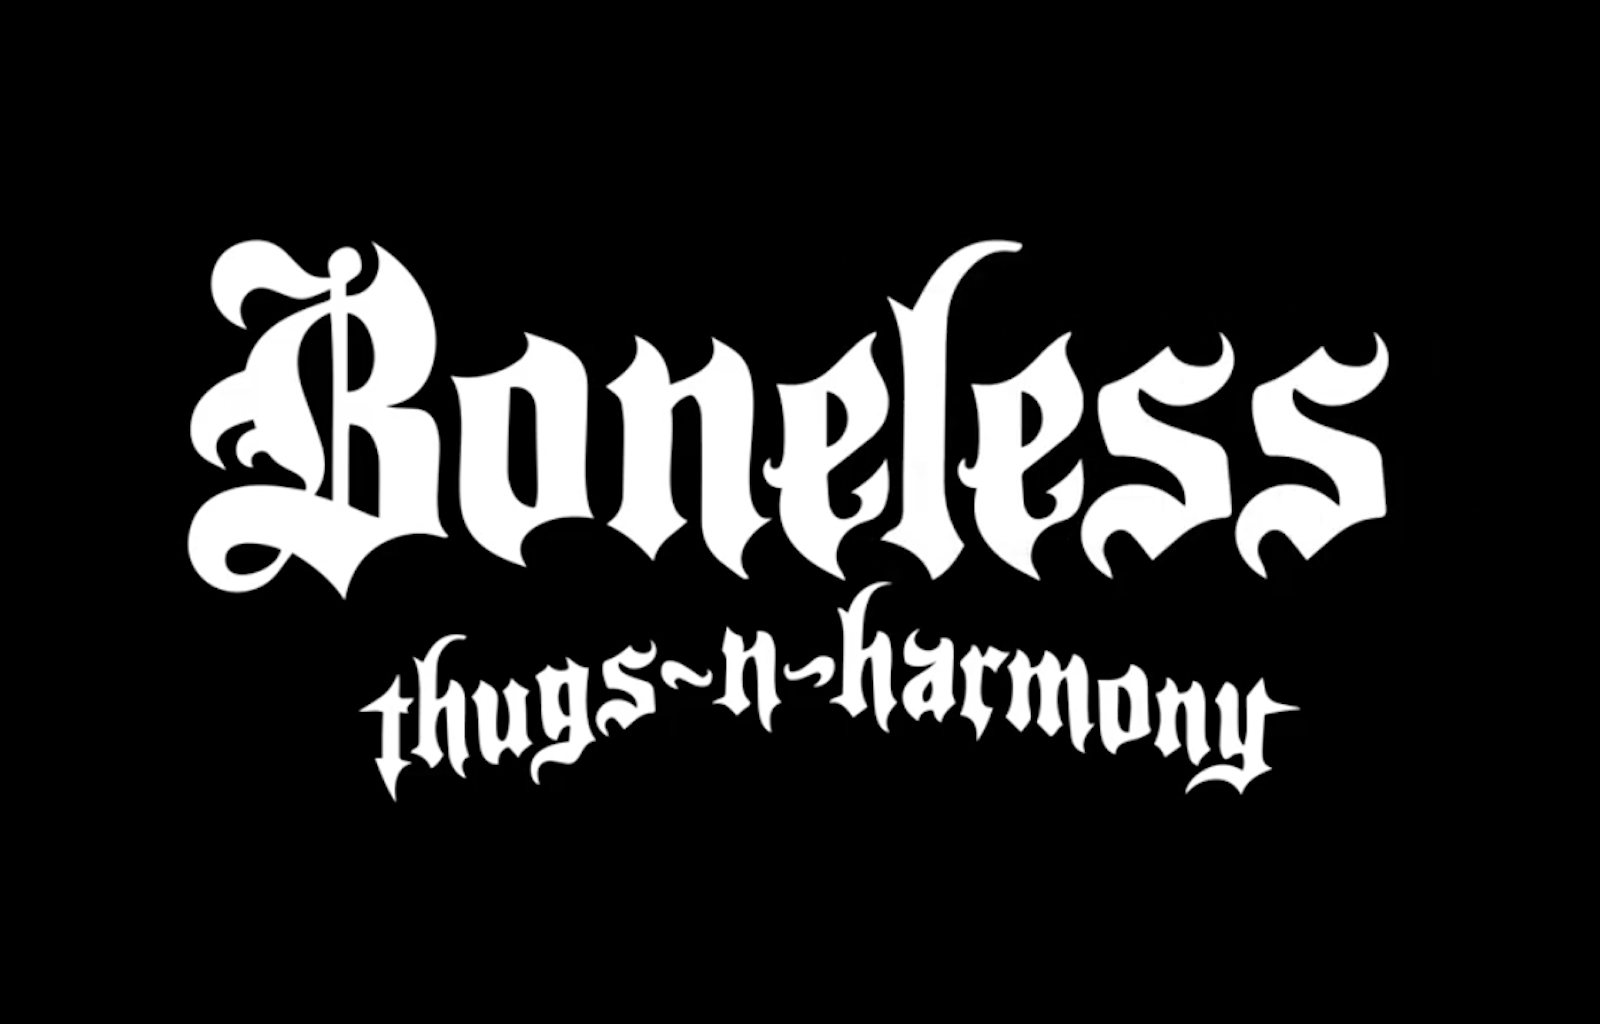 Bone Thugs-N-Harmony is Changing its Name After More Than 25 Years.